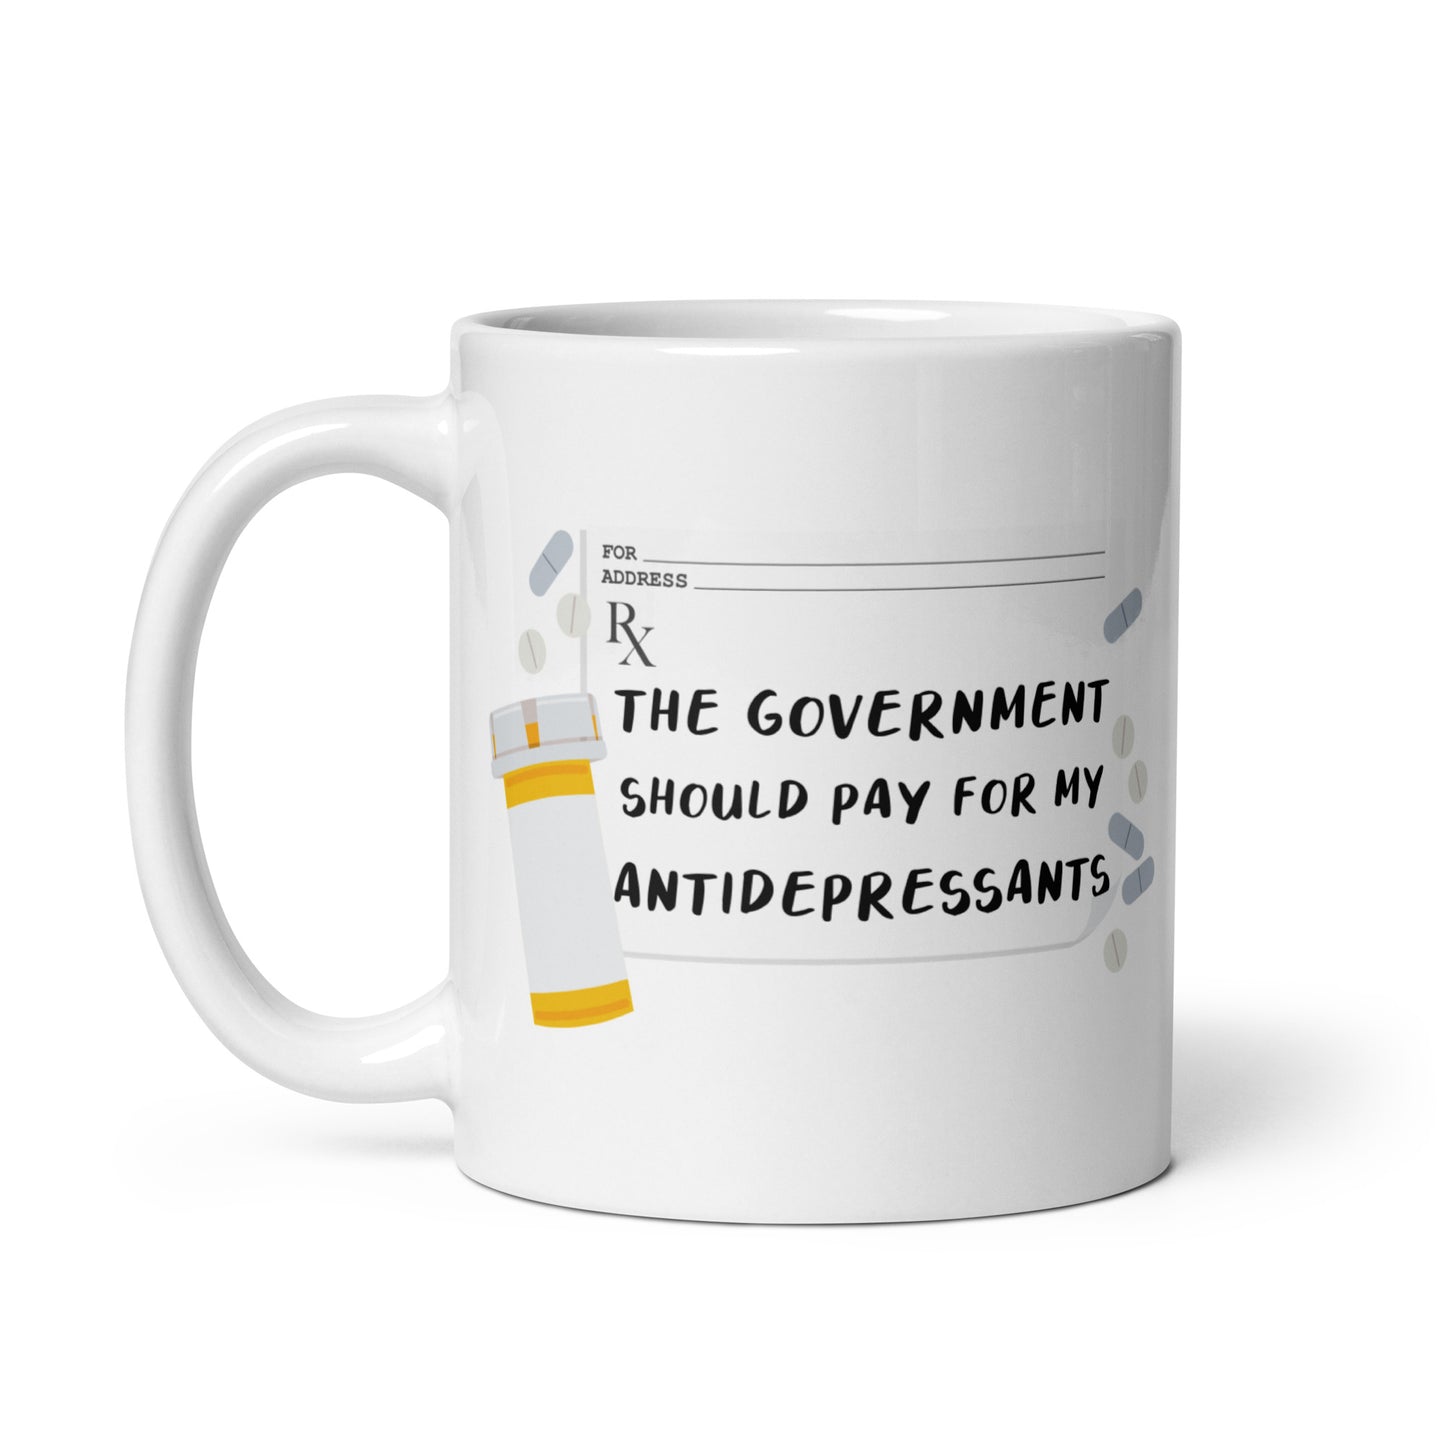 The Government Should Pay For My Antidepressants Mug